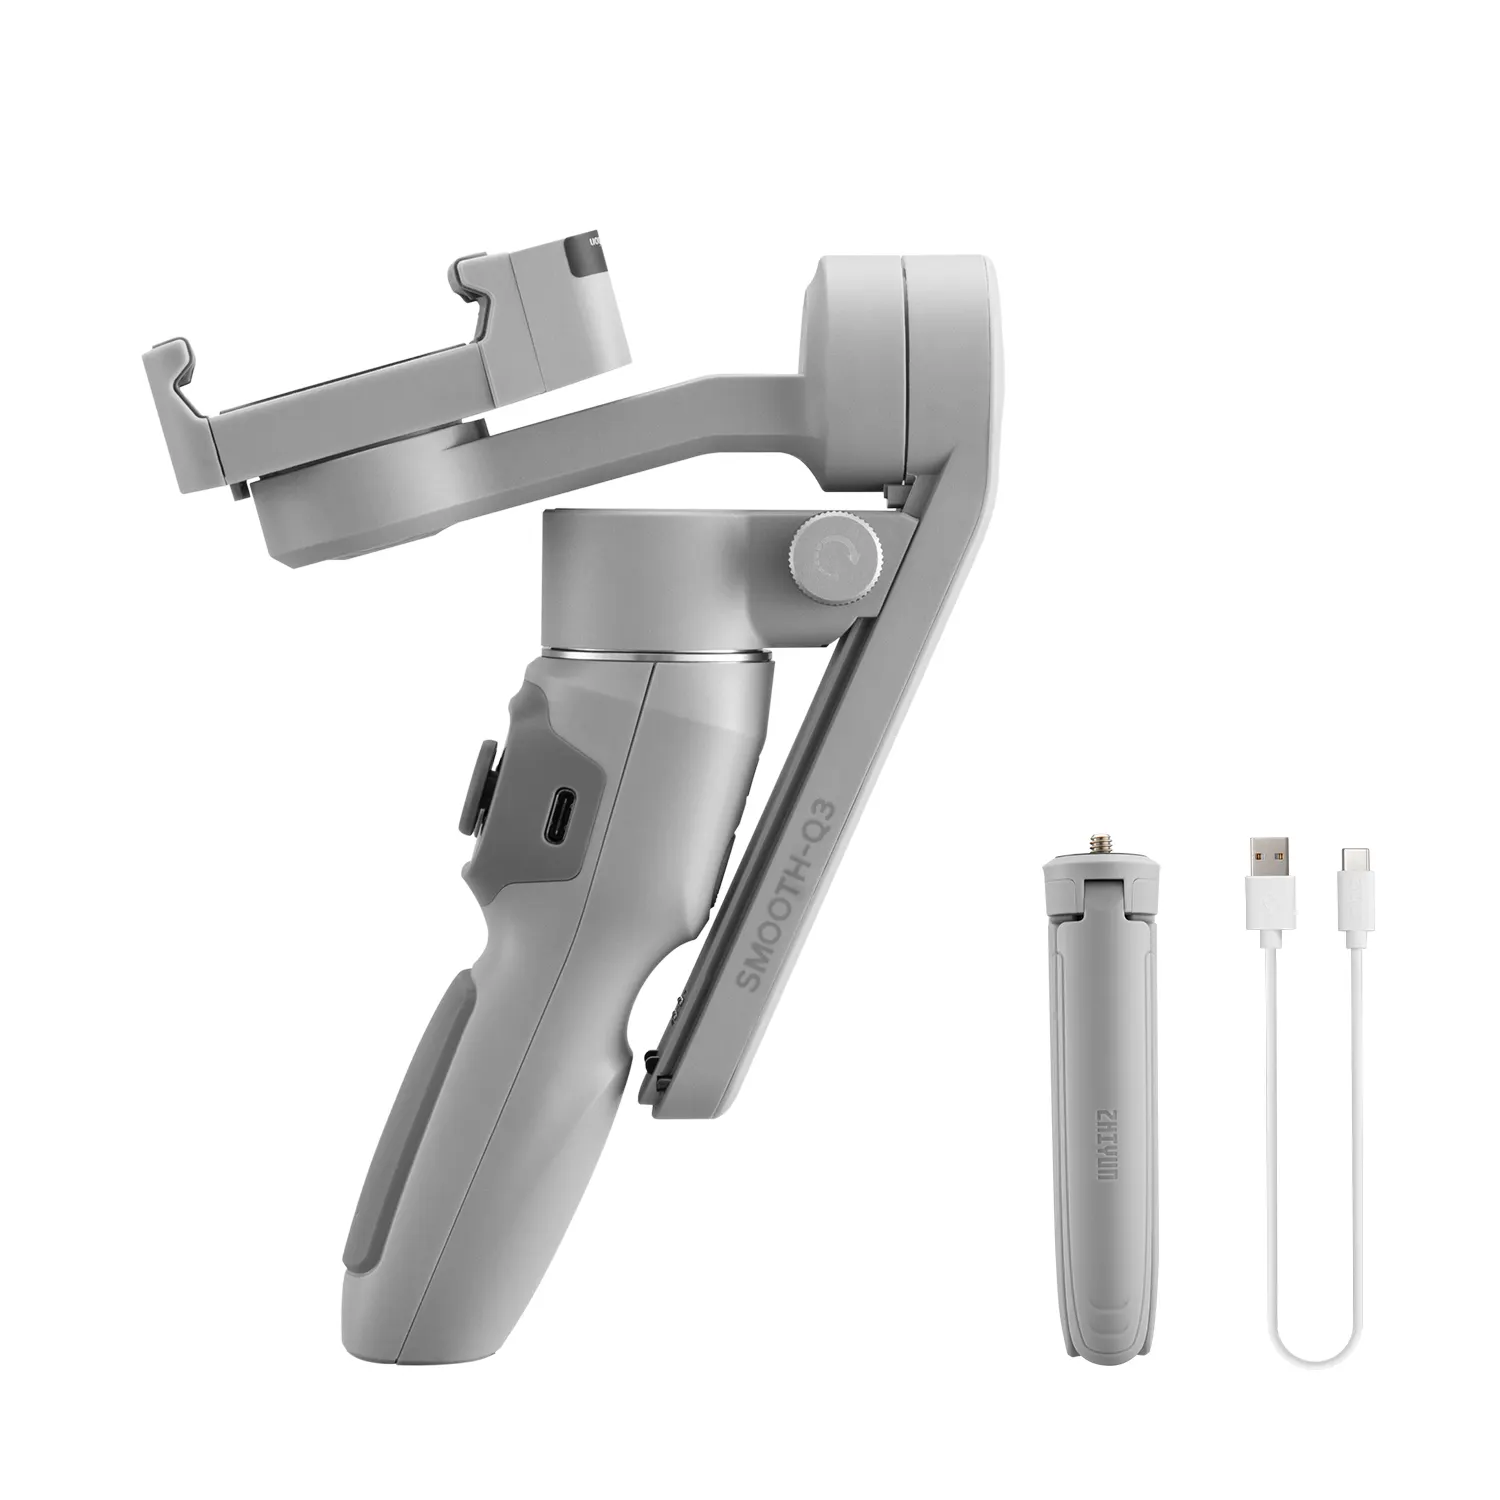 Zhiyun Smooth Q3 Smartphones Gimbal 3-Axis Handheld Stabilizers for Smartphones iPhone/Samsung/Huawei/Xiaomi/Action Camera